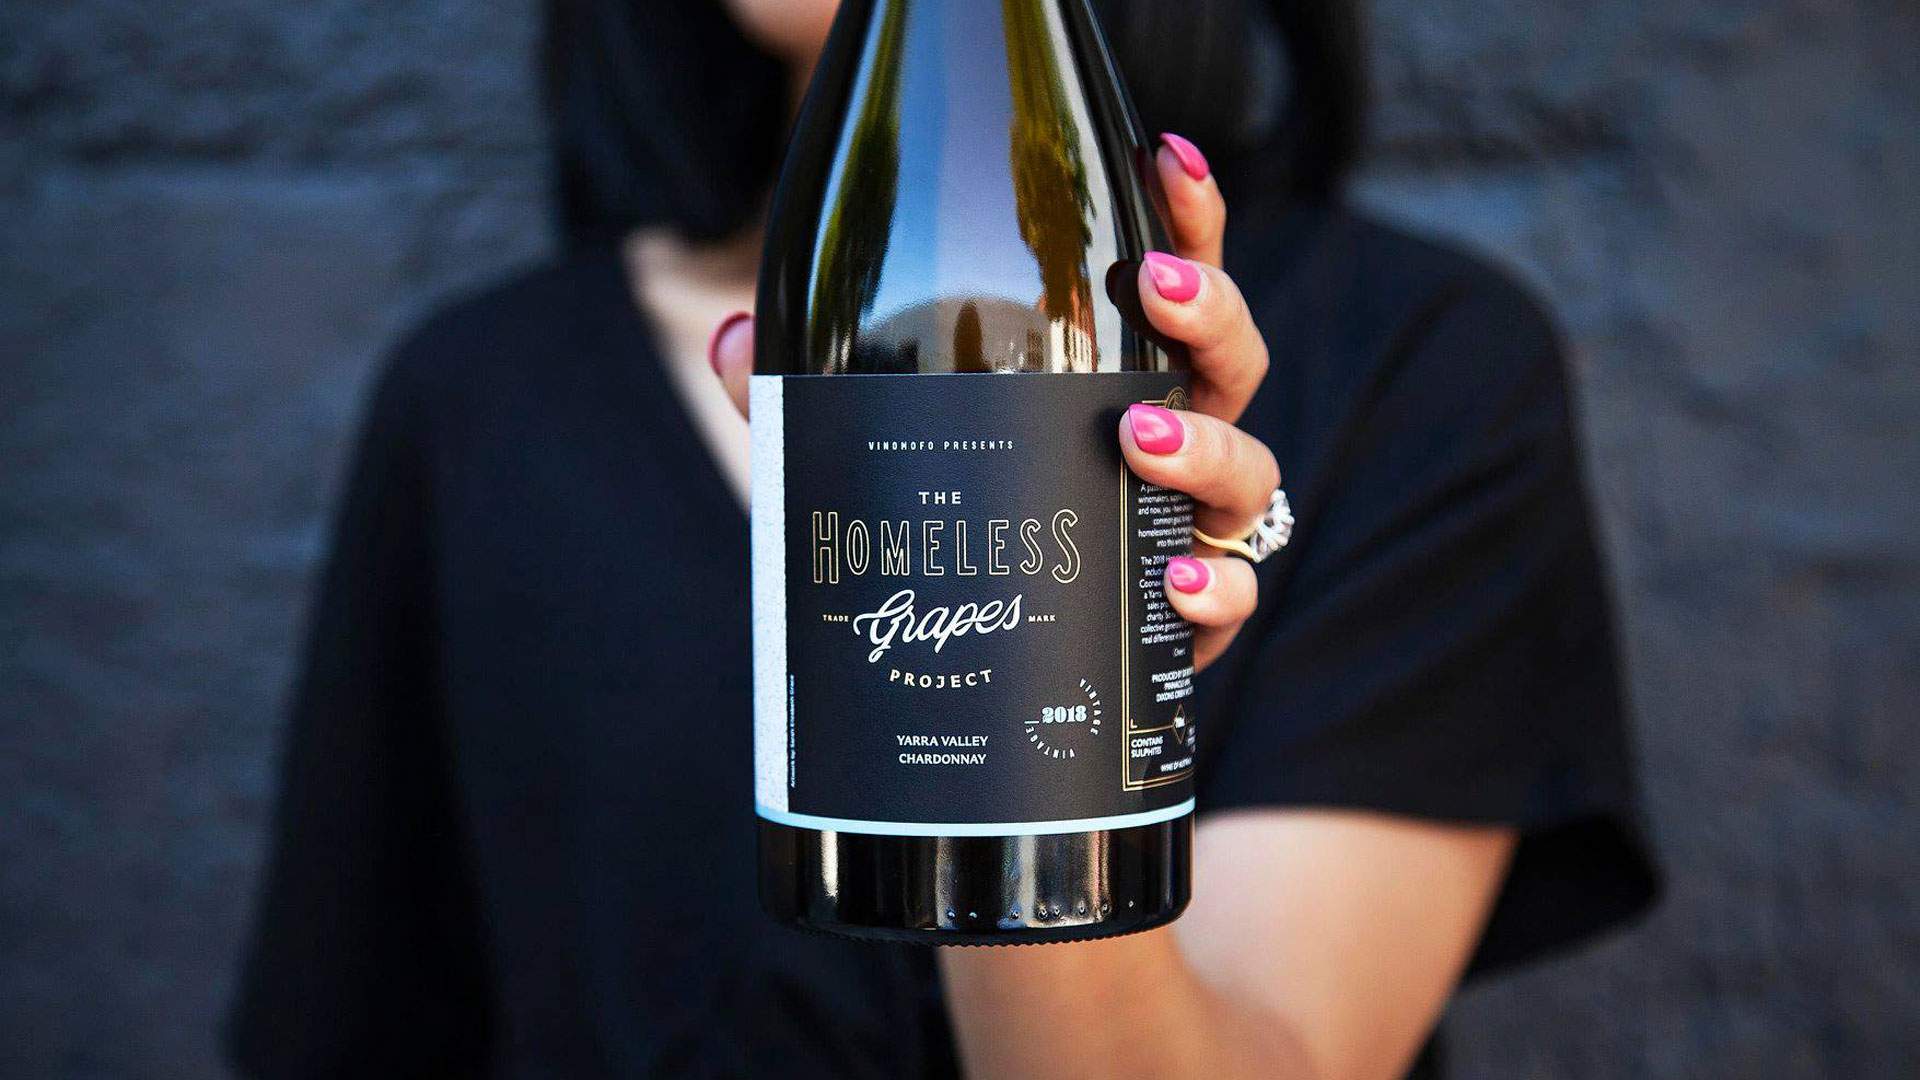 You Can Drink Wine for a Good Cause Thanks to the Homeless Grapes Project